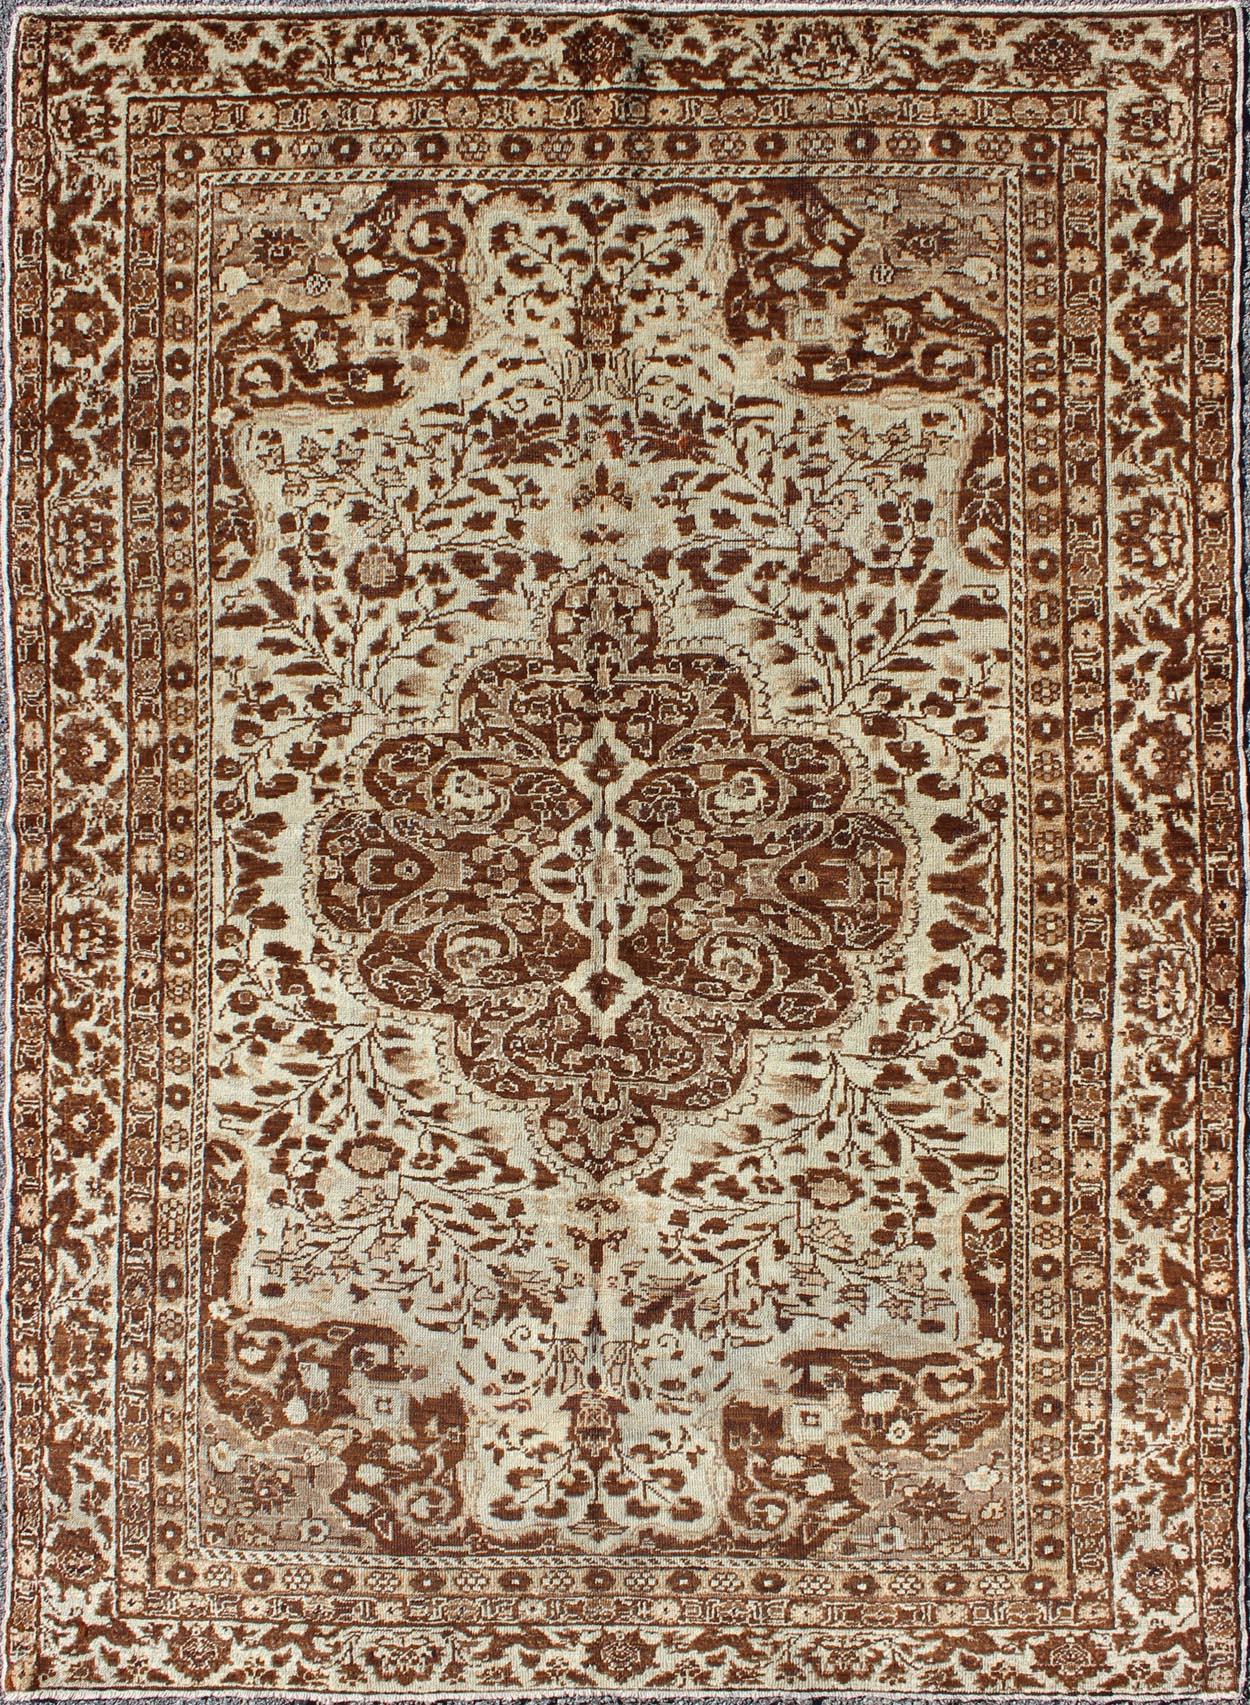 This Turkish Sivas displays an ivory field surrounded by a richly detailed classical arabesque design, with an intricate center medallion in the field that animates the tone and plays off of the finely detailed texture of the border. An exquisite